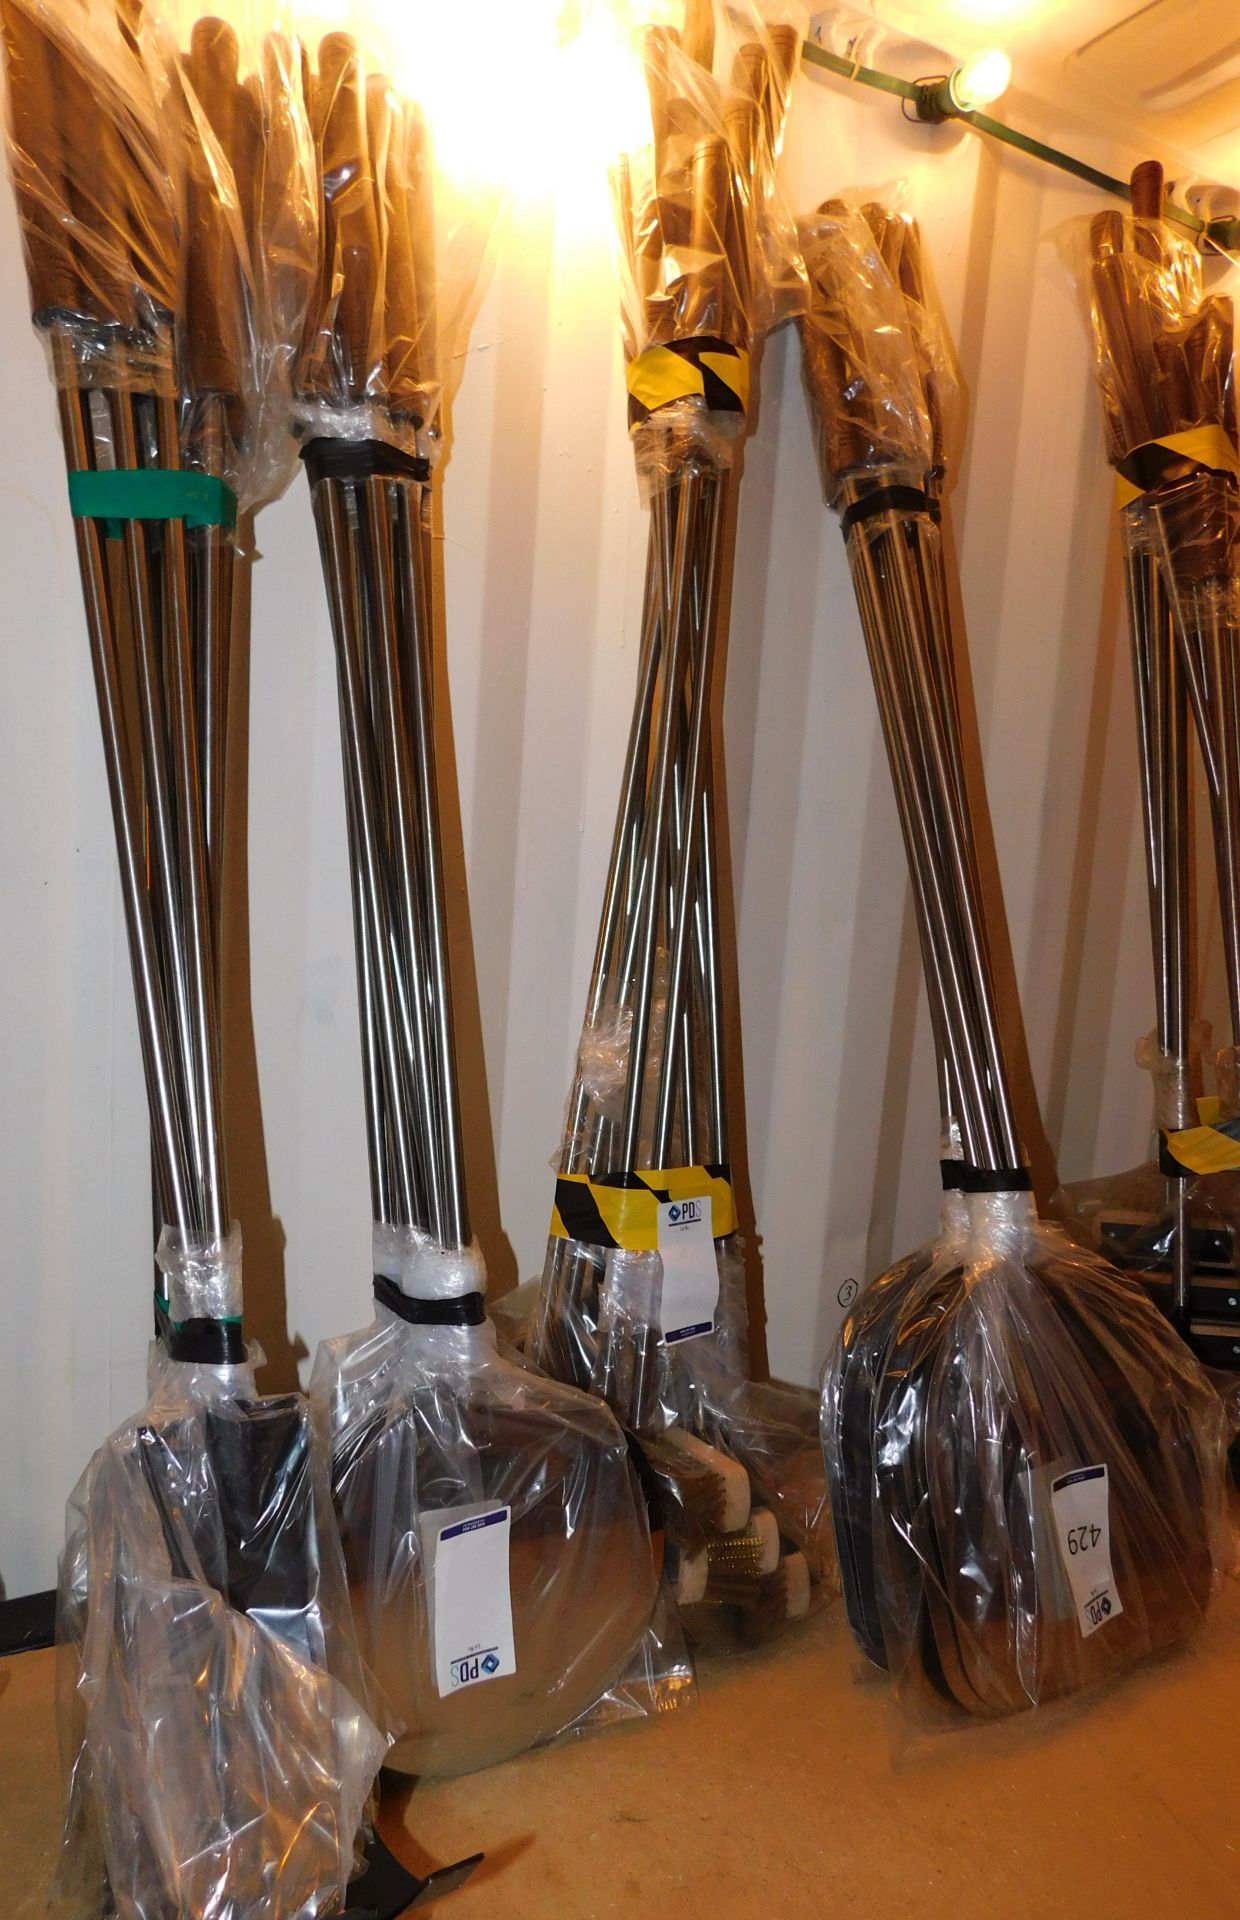 10 Sets of 4 Wood Burning Oven Tools, 1.3 metres (Library Images) (Located Manchester. Please